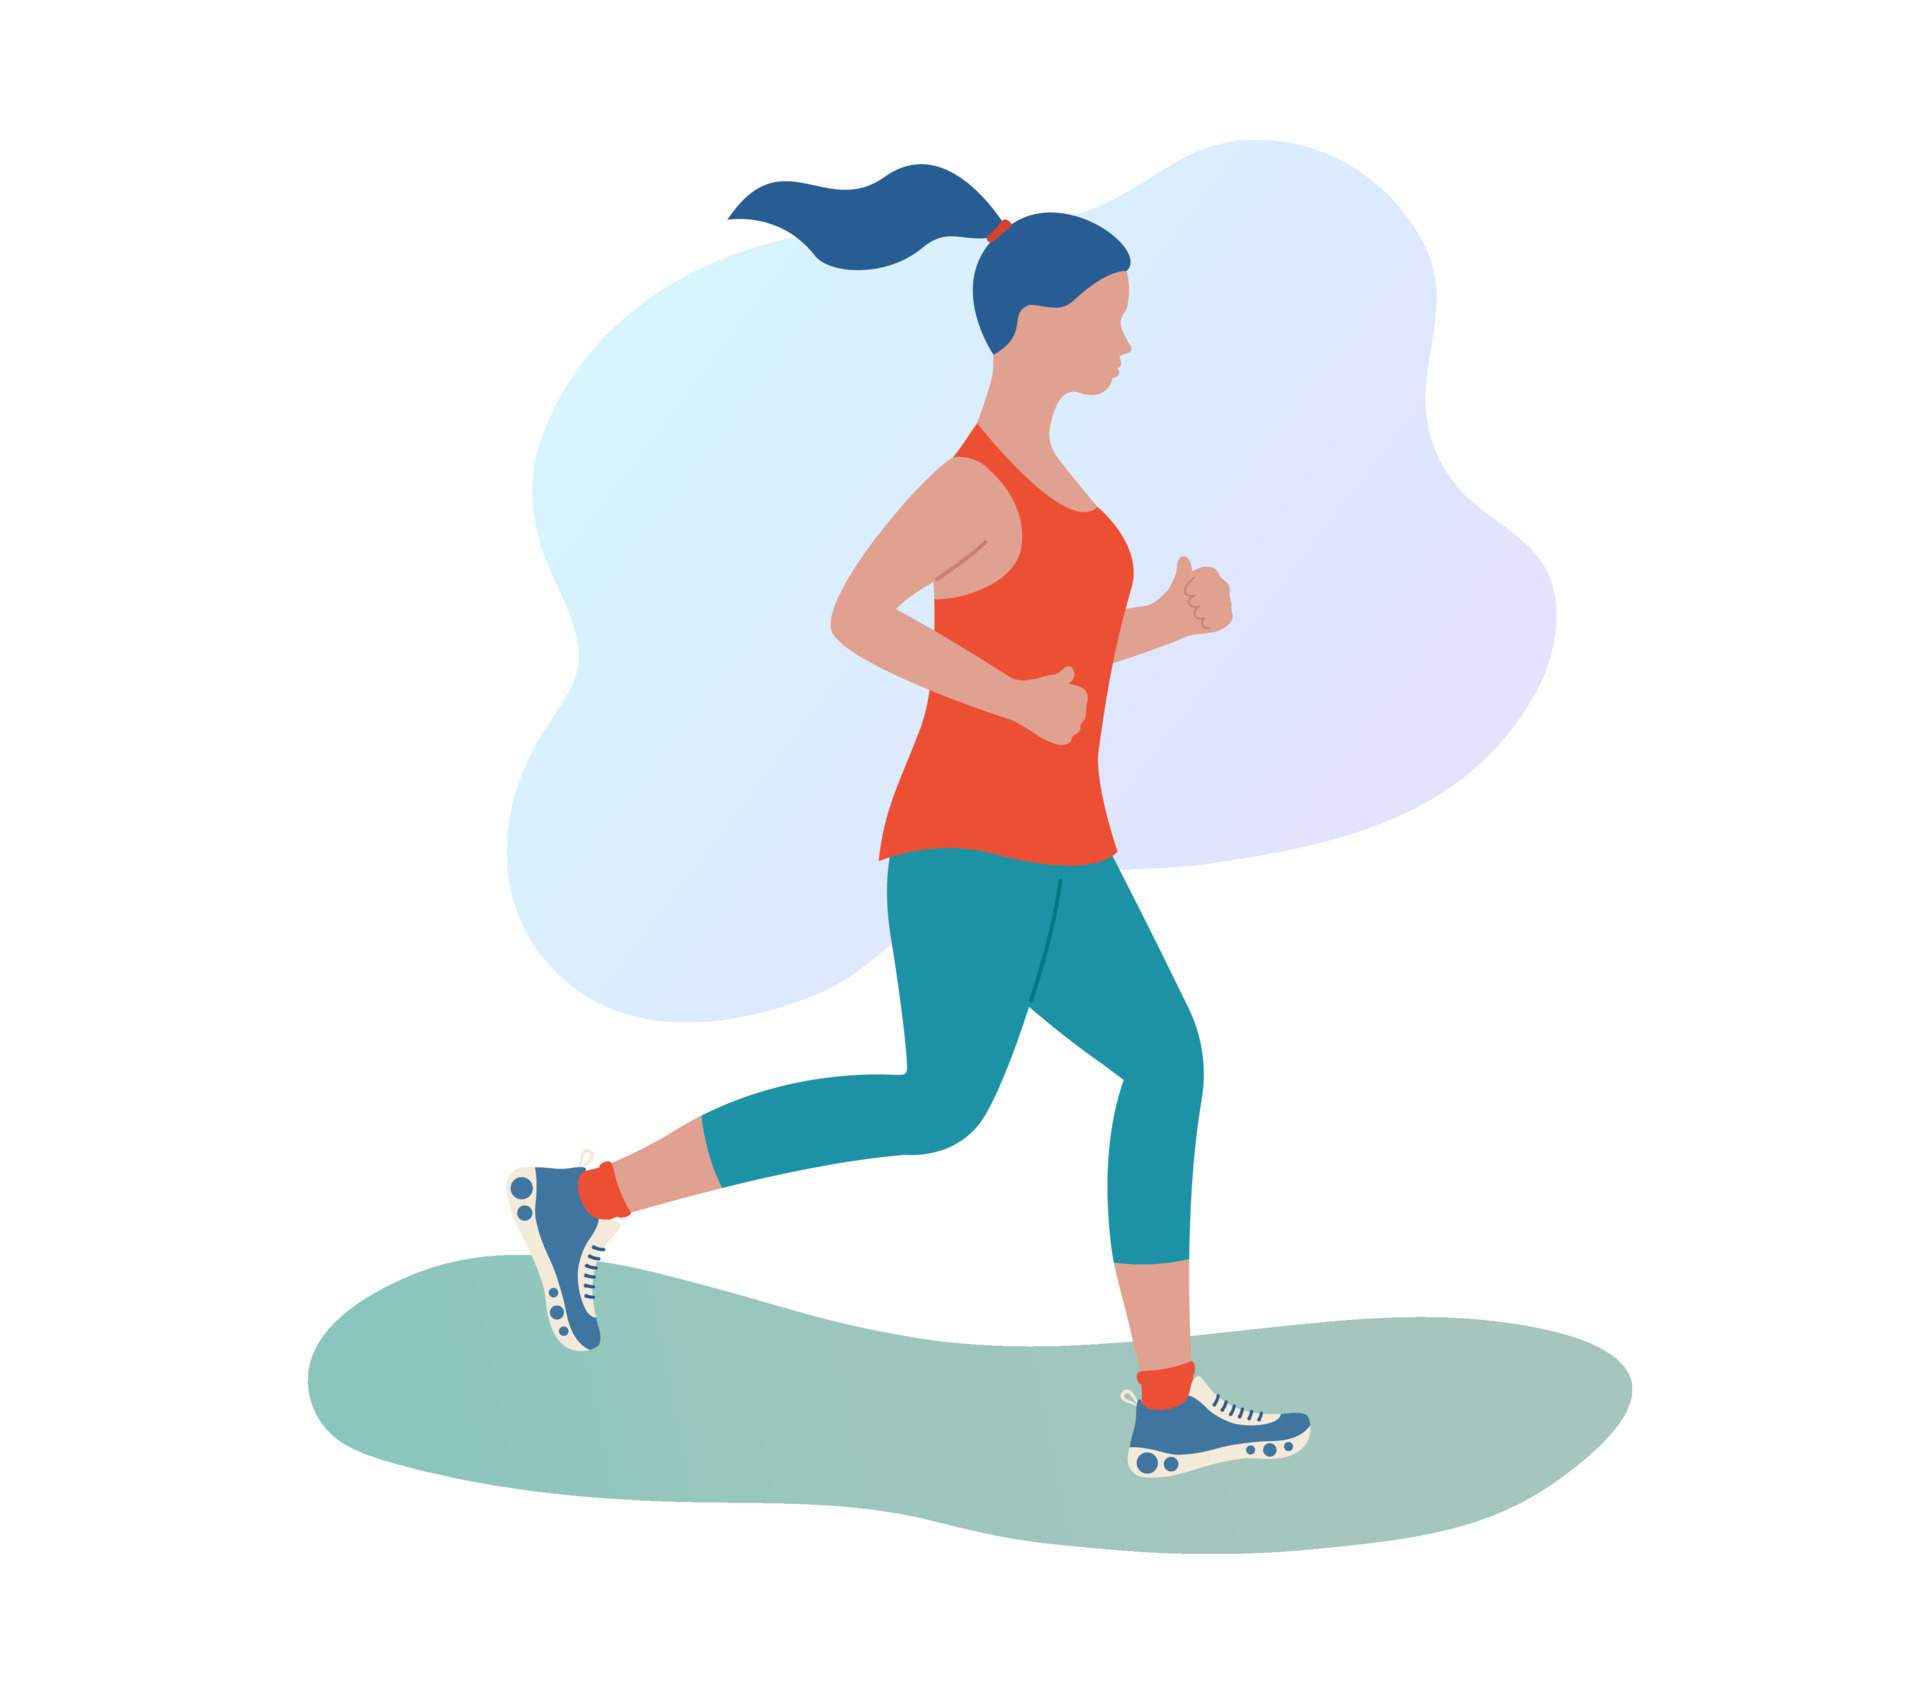 https://static.vecteezy.com/system/resources/previews/008/384/742/original/jogging-woman-outdoors-girl-running-in-sportswear-morning-jog-in-park-flat-illustration-healthy-lifestyle-and-fitness-concept-vector.jpg